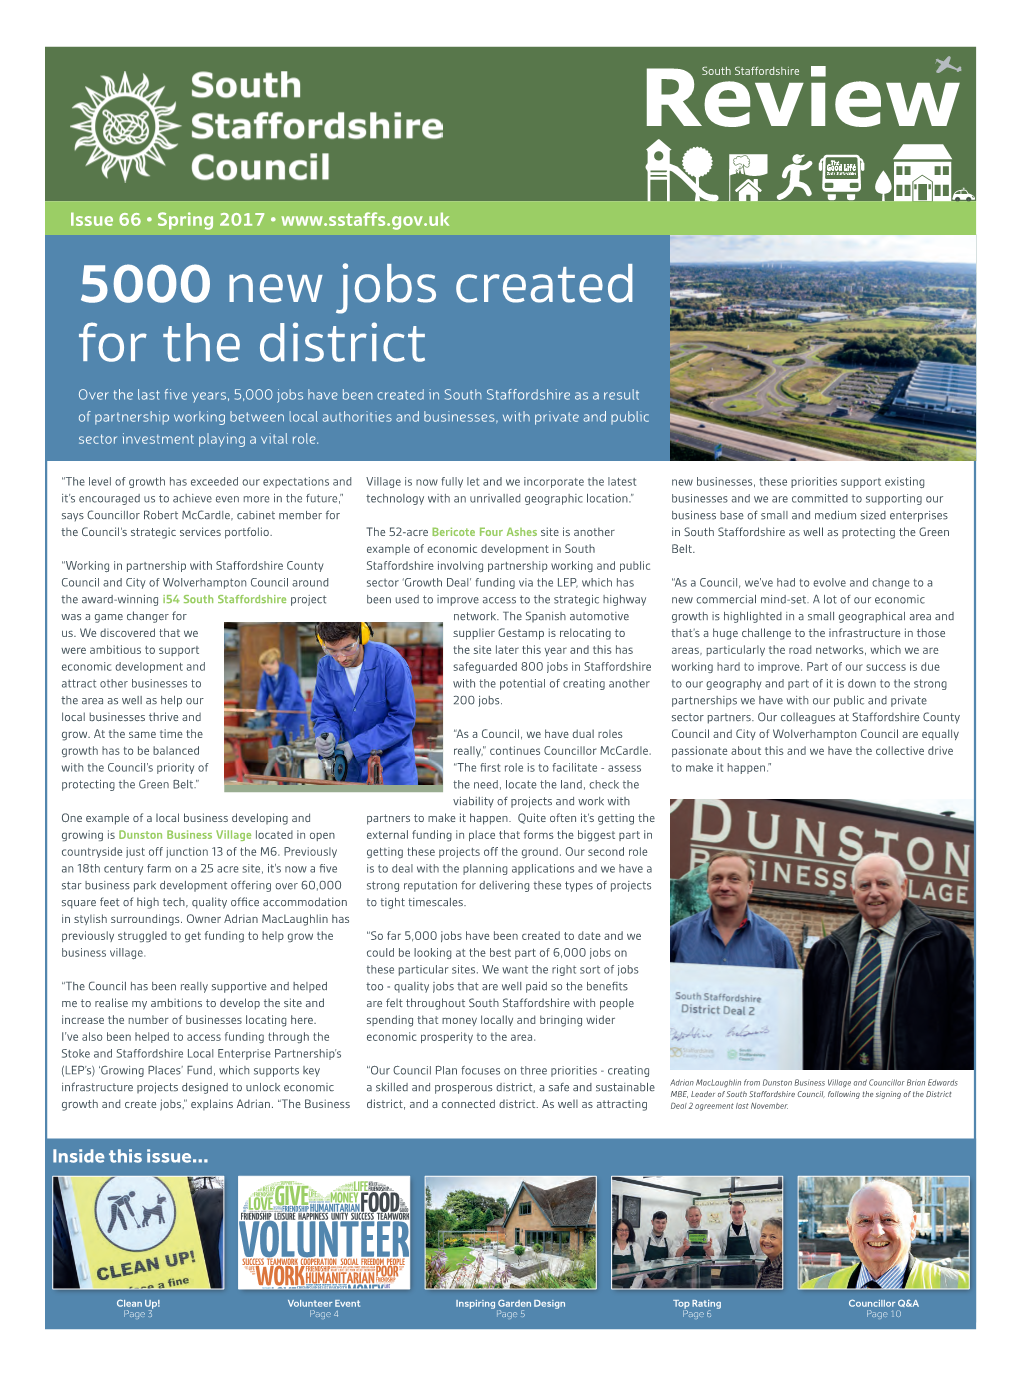 5000 New Jobs Created for the District